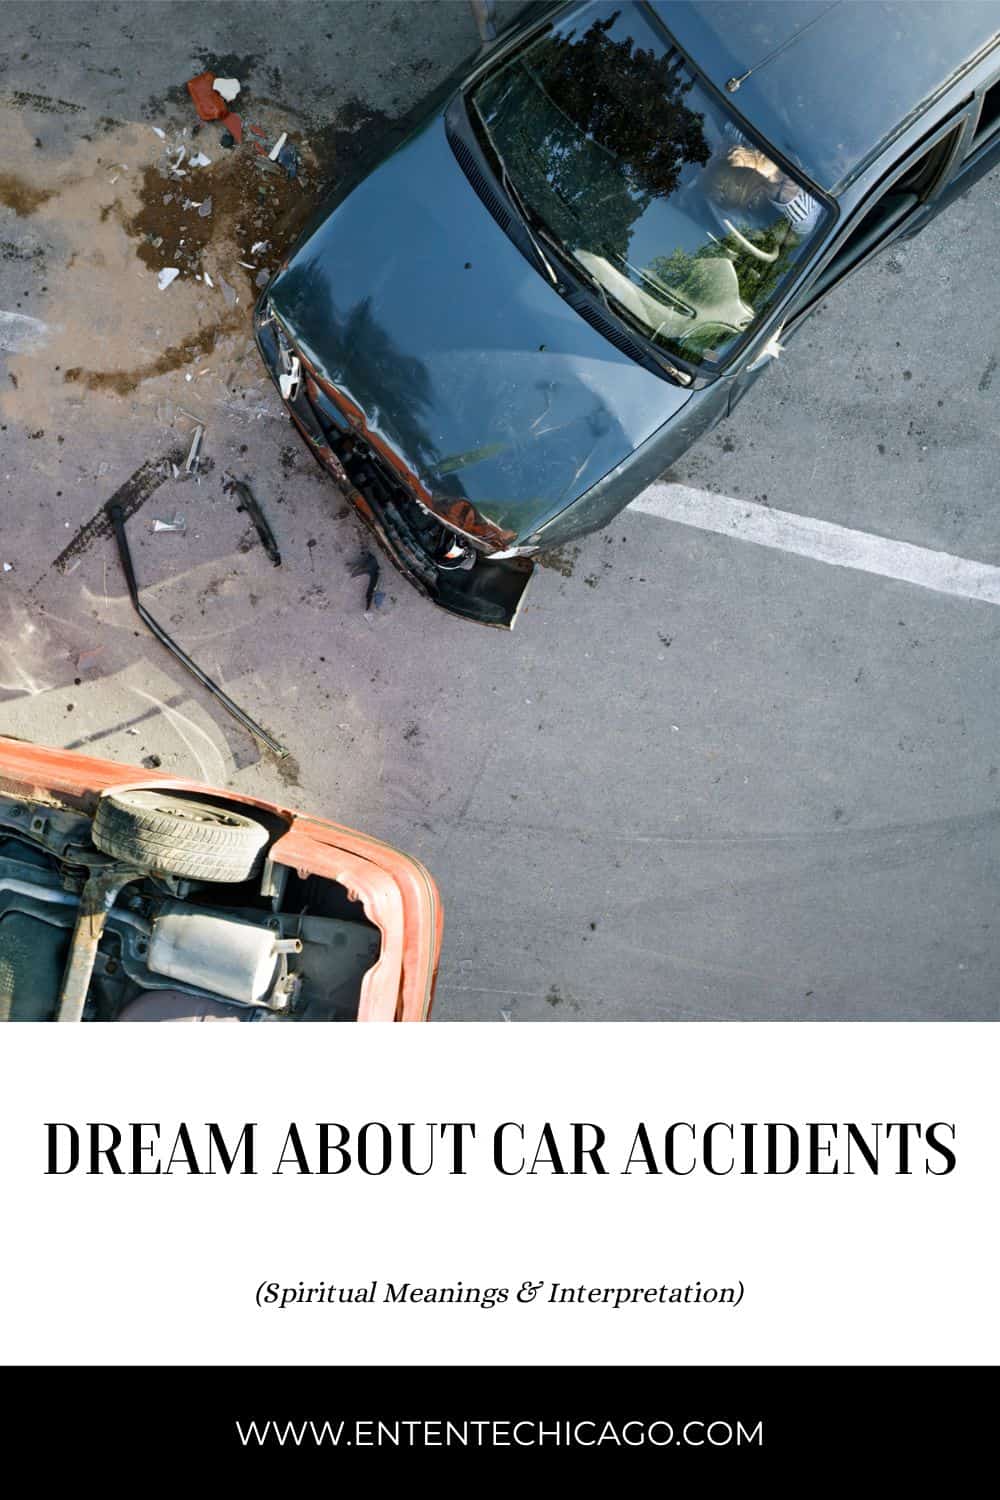 Dream About Car Accidents (Spiritual Meanings & Interpretation)